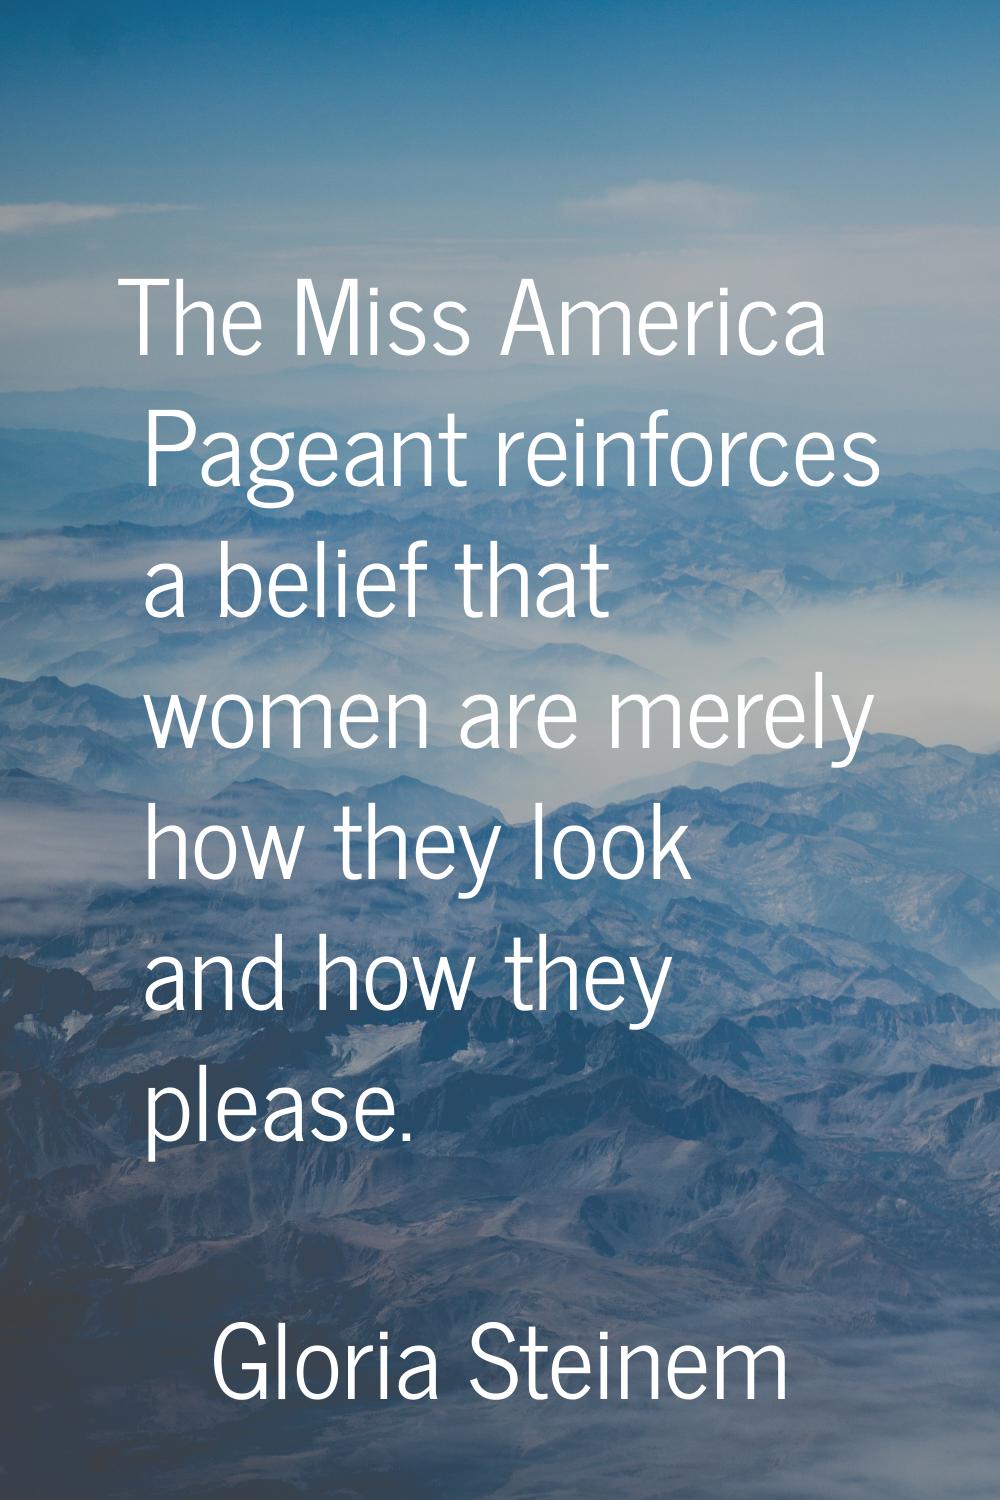 The Miss America Pageant reinforces a belief that women are merely how they look and how they pleas